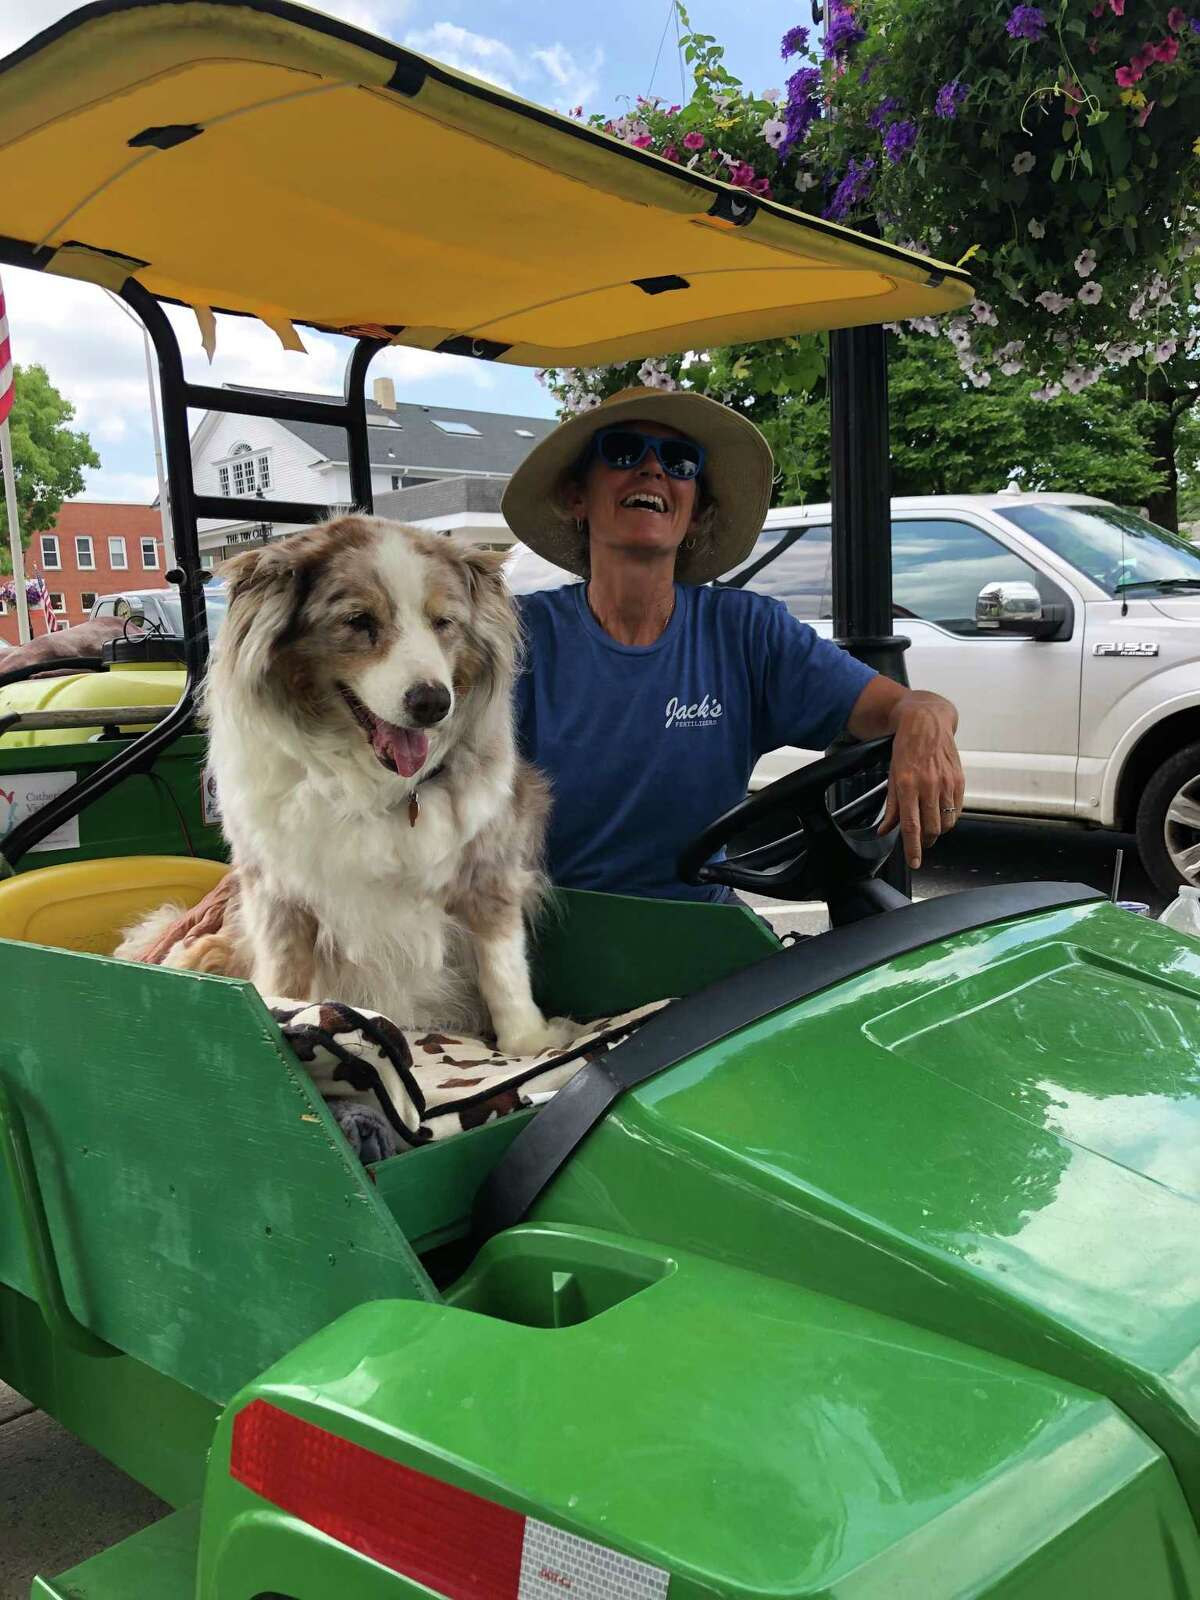 Biscuit with “the flower lady” Spencer Moore on the watering cart that the two rode around Ridgefield's village for years, caring for the baskets of hanging plants. “I will say that Biscuit taught me a lot during the countless hours we spent together caring for the baskets — value of patience, loyalty, generosity, acceptance, and savoring each day,” Moore said. “She did not require a lot but she certainly gave a lot. It will be big ‘paws’ to fill some day!” said Moore. With flower baskets not just in the village these days, but down on Route 35, Moore has human help with her watering duties.